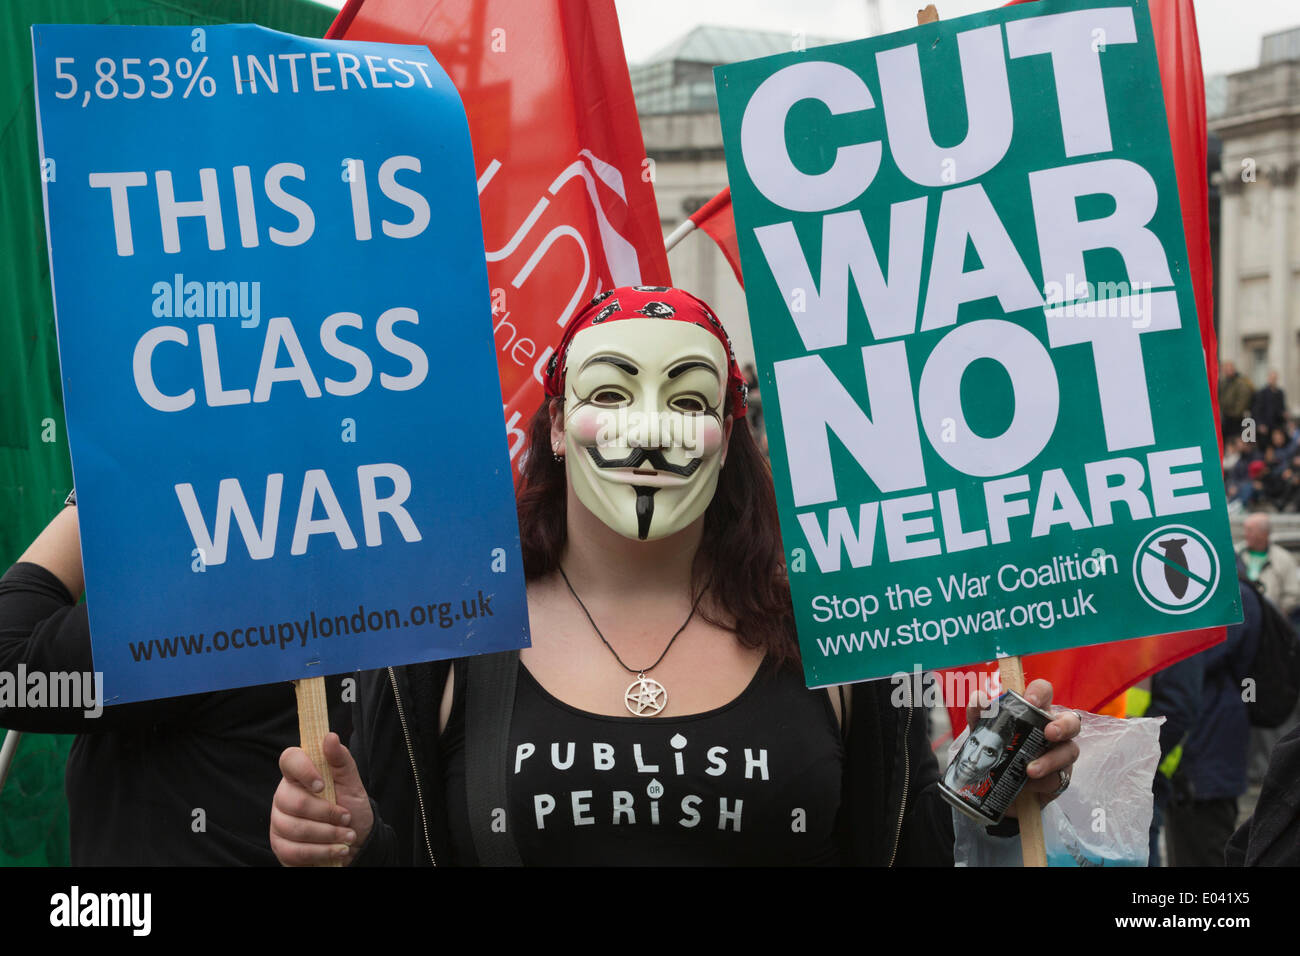 London, UK. 1 May 2014. Pictured: Woman wearing a V for Vendetta mask protests against Wonga pay day loan company and loan sharks. May Day Trade Union Rally in Trafalgar Square, London, UK. At this Rally the recently deceased Bob Crow, RMT General Secretary,  and Tony Benn, Labour politician were honoured. Credit:  Nick Savage/Alamy Live News Stock Photo